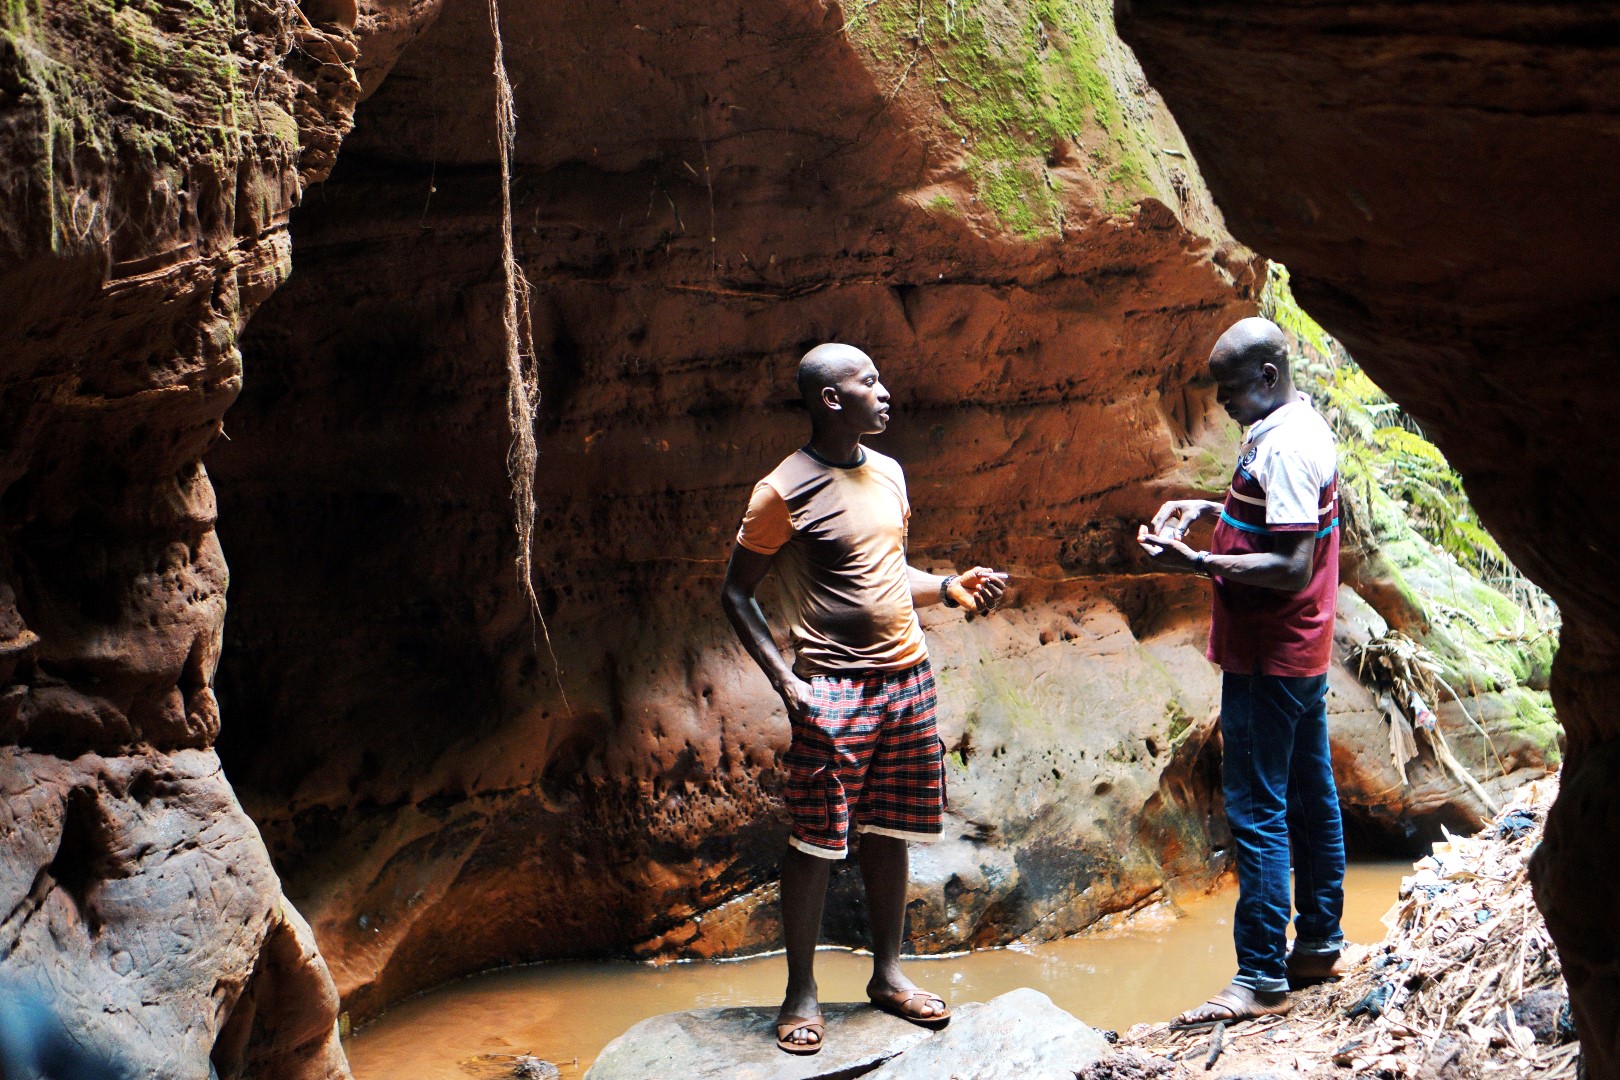 Tour guides at the Ngwo cave and waterfall in Enugu, Nigeria